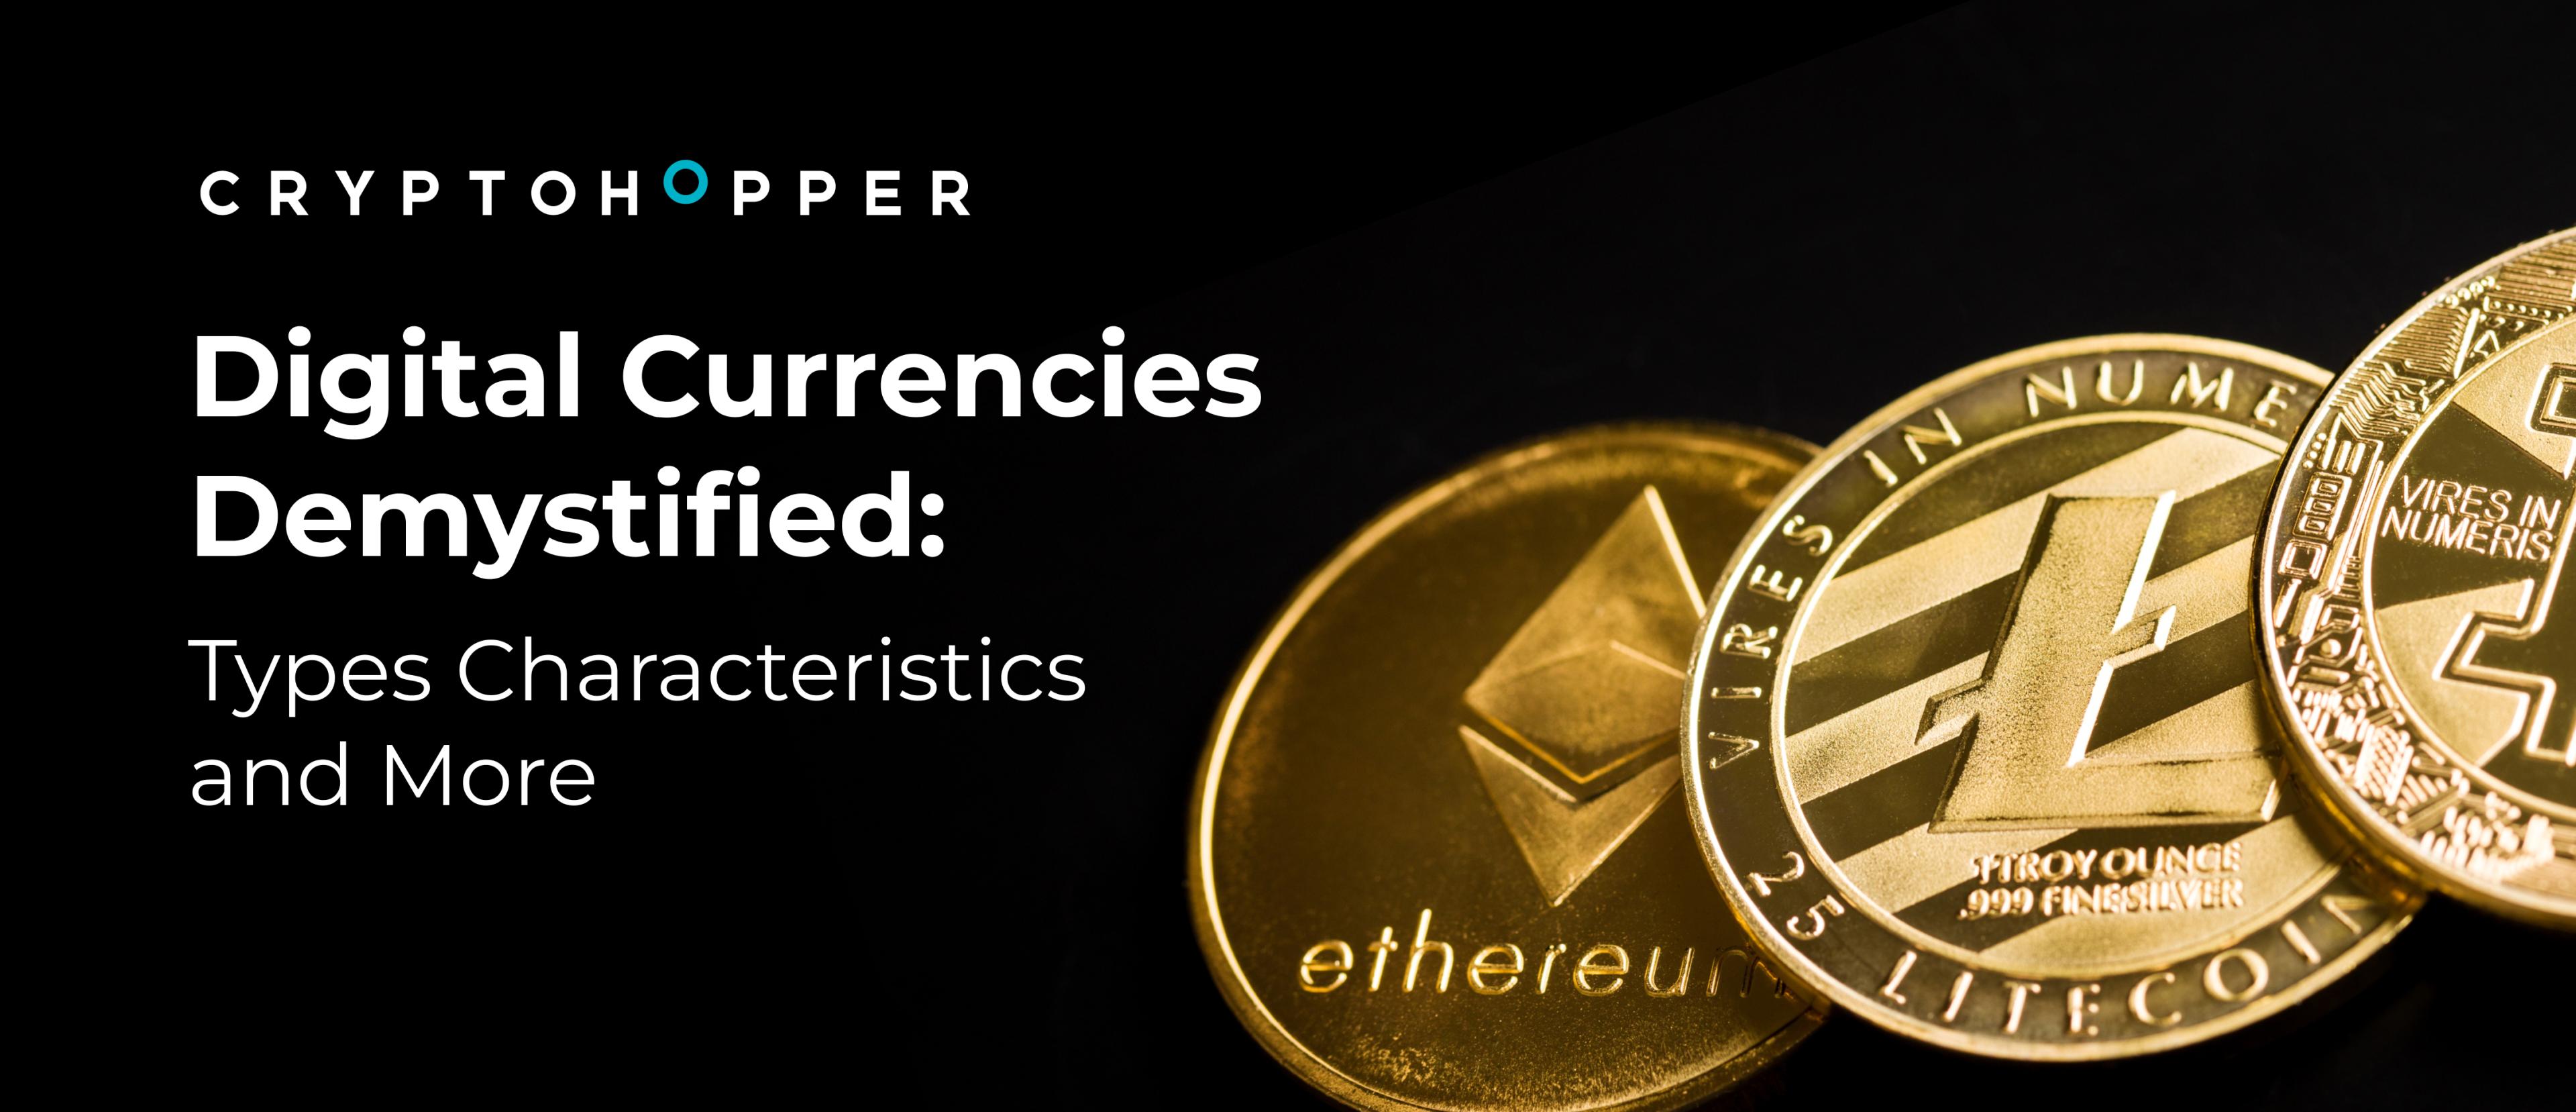 Digital Currencies Demystified: Types, Characteristics, and More